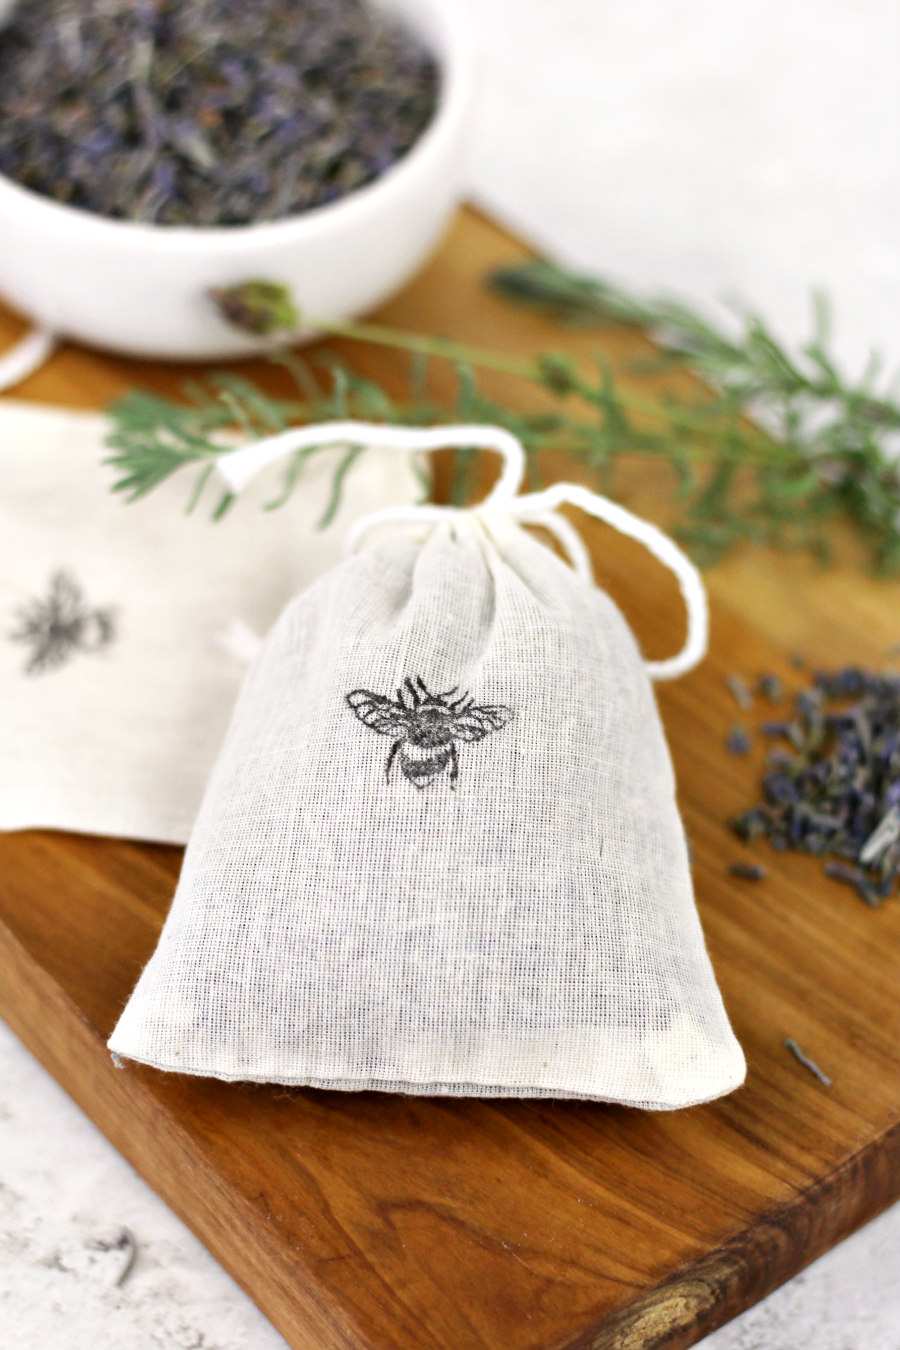 Dried Lavender Sweet Floral Fragrance Sachet - Bumble Bee Stamped Muslin Bag from Holoka Home on Etsy. Dried lavender sits around muslin bag on wooden board.